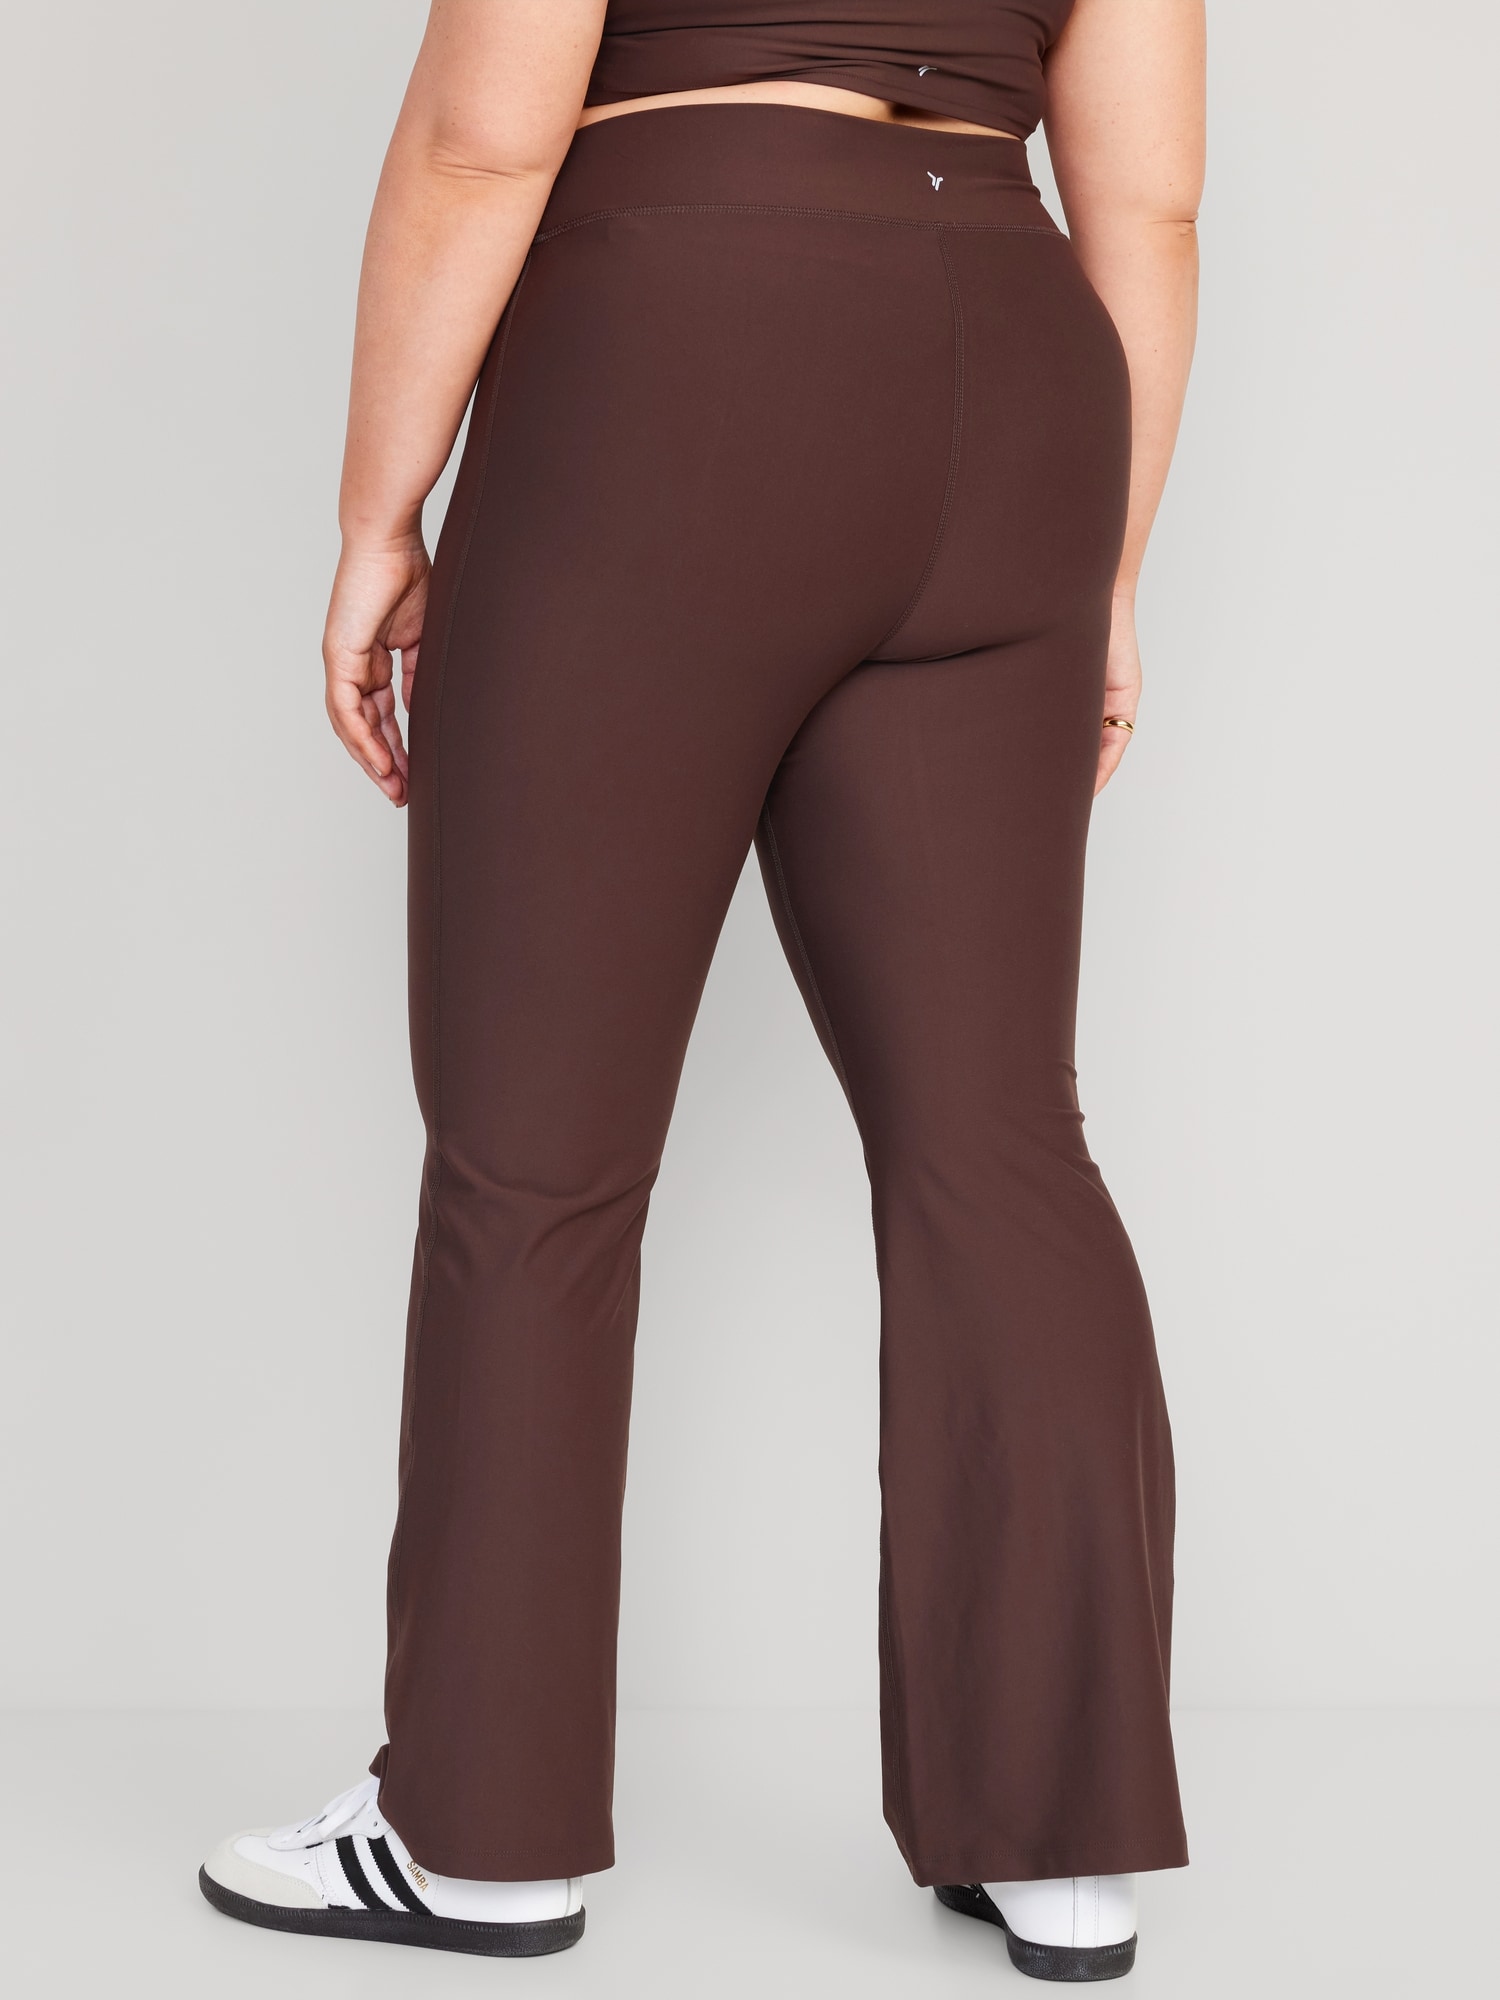 Extra High-Waisted PowerSoft Flare Leggings for Women, Old Navy